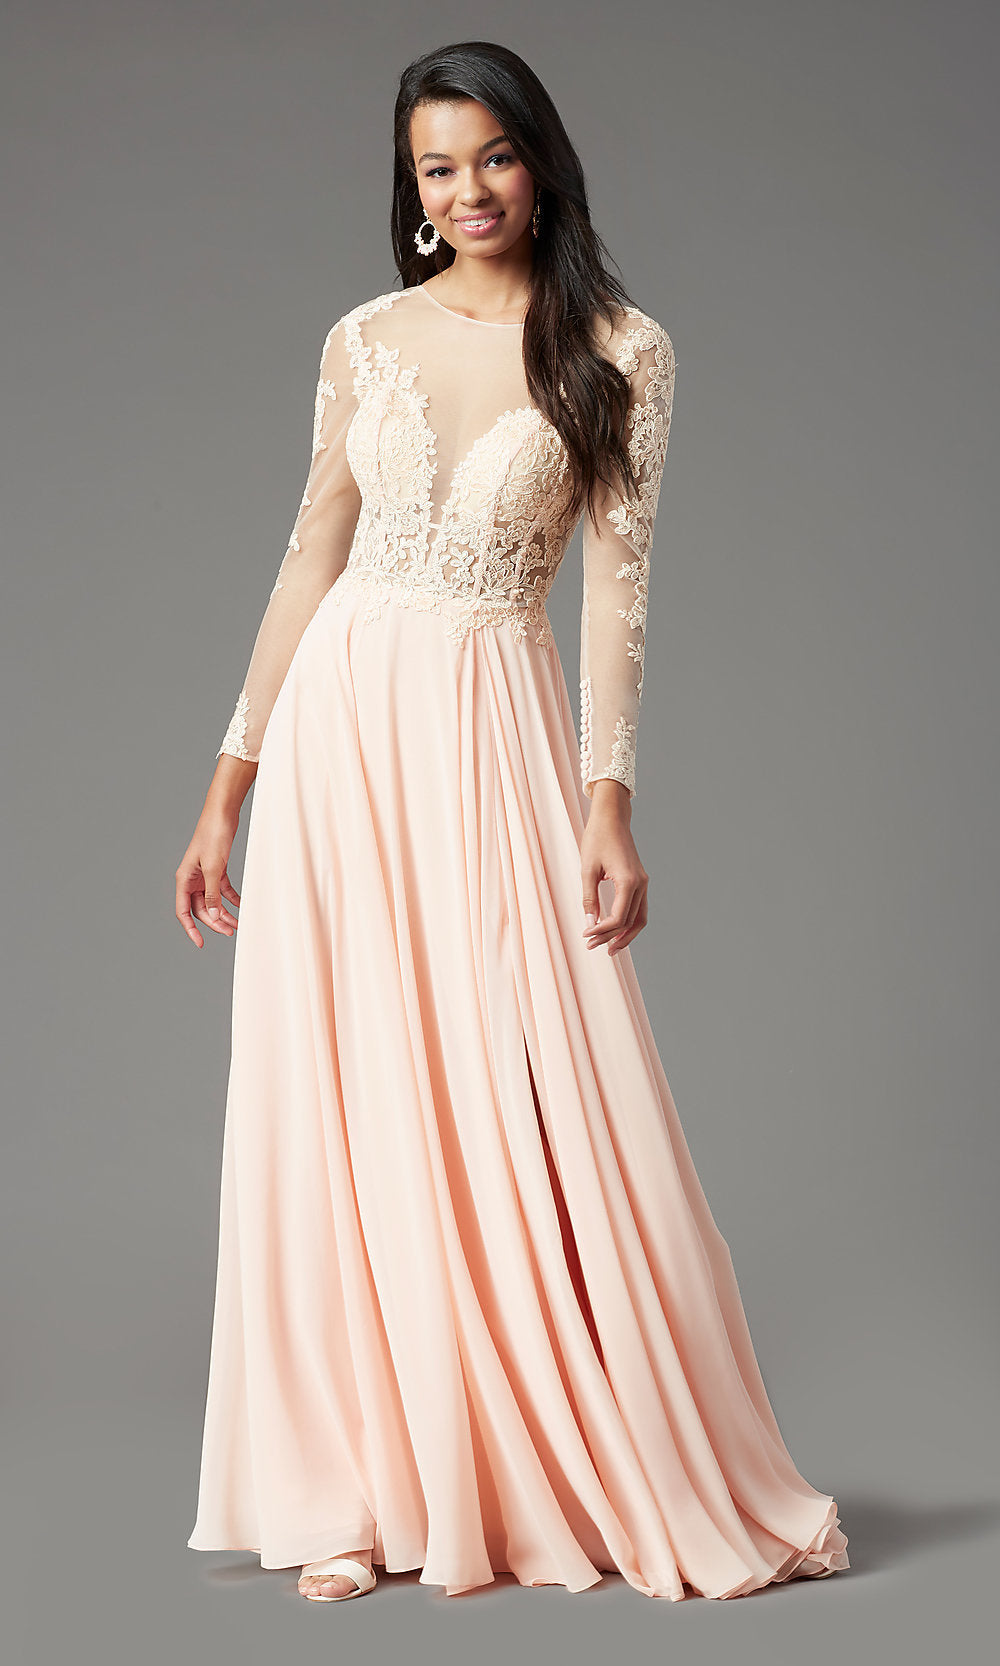 Promgirl Private Label-Long-Sleeve Chiffon Illusion Prom Dress by PromGirl